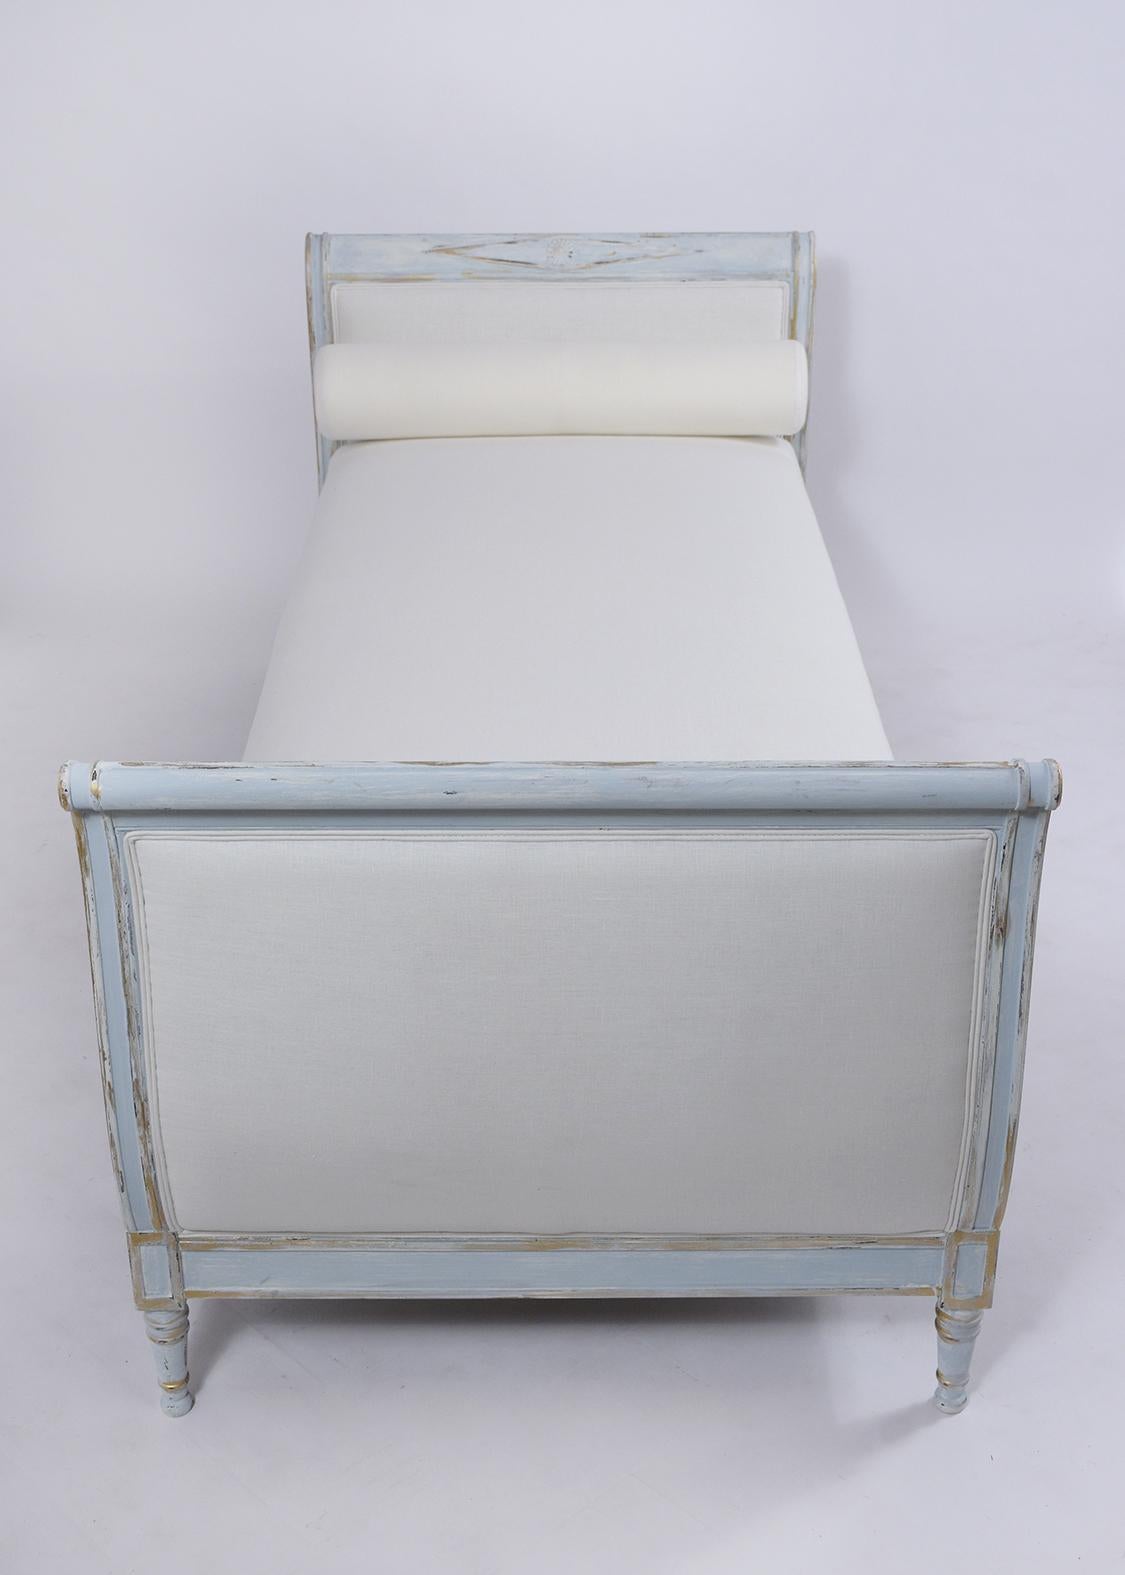 Early 20th Century Antique French Empire Painted Day Bed